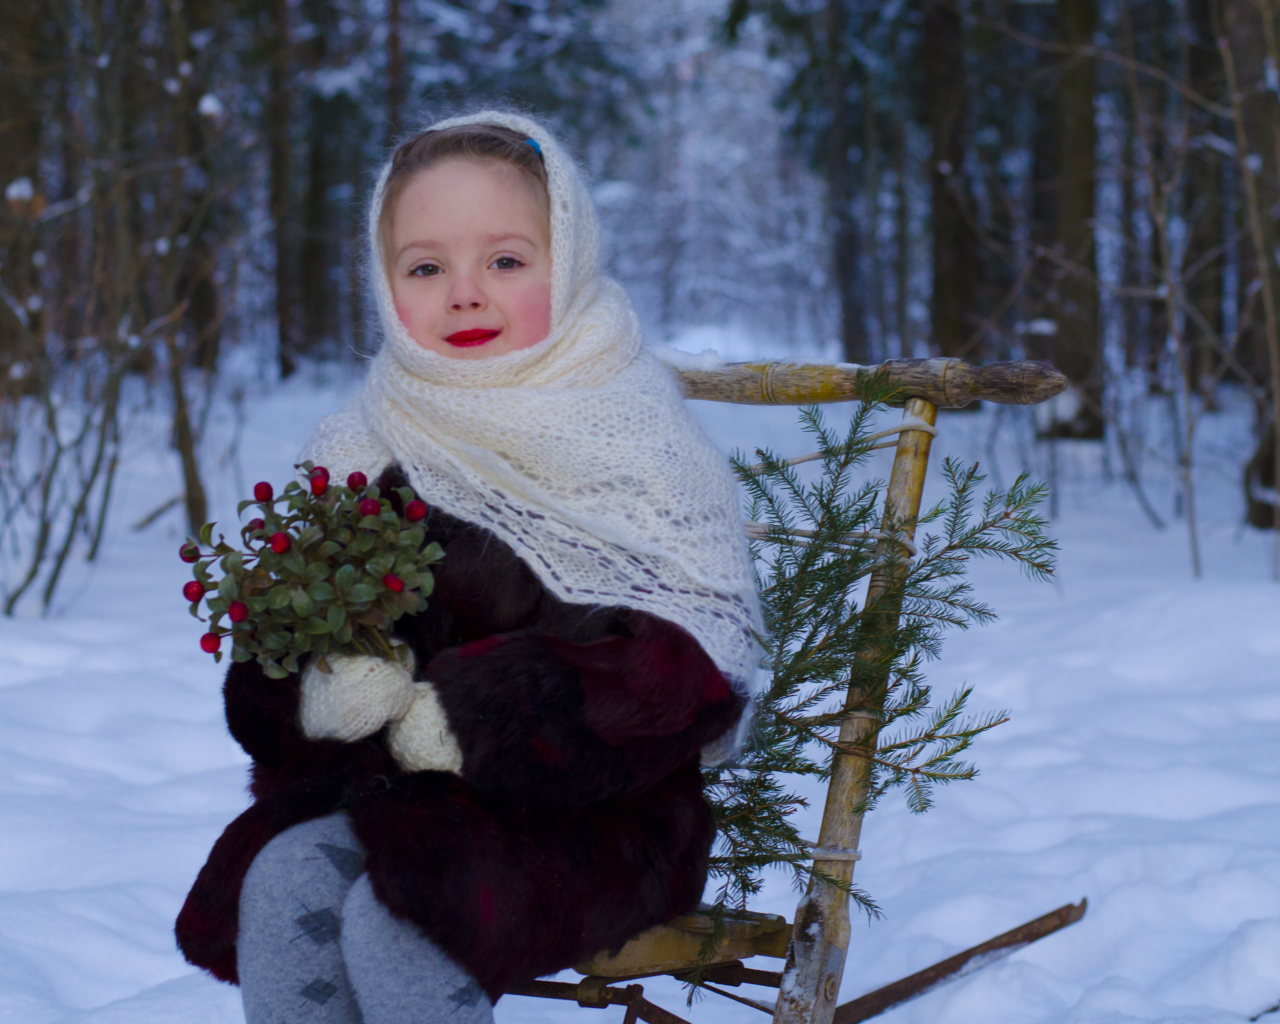 Little Girl In Winter Outfit wallpaper 1280x1024